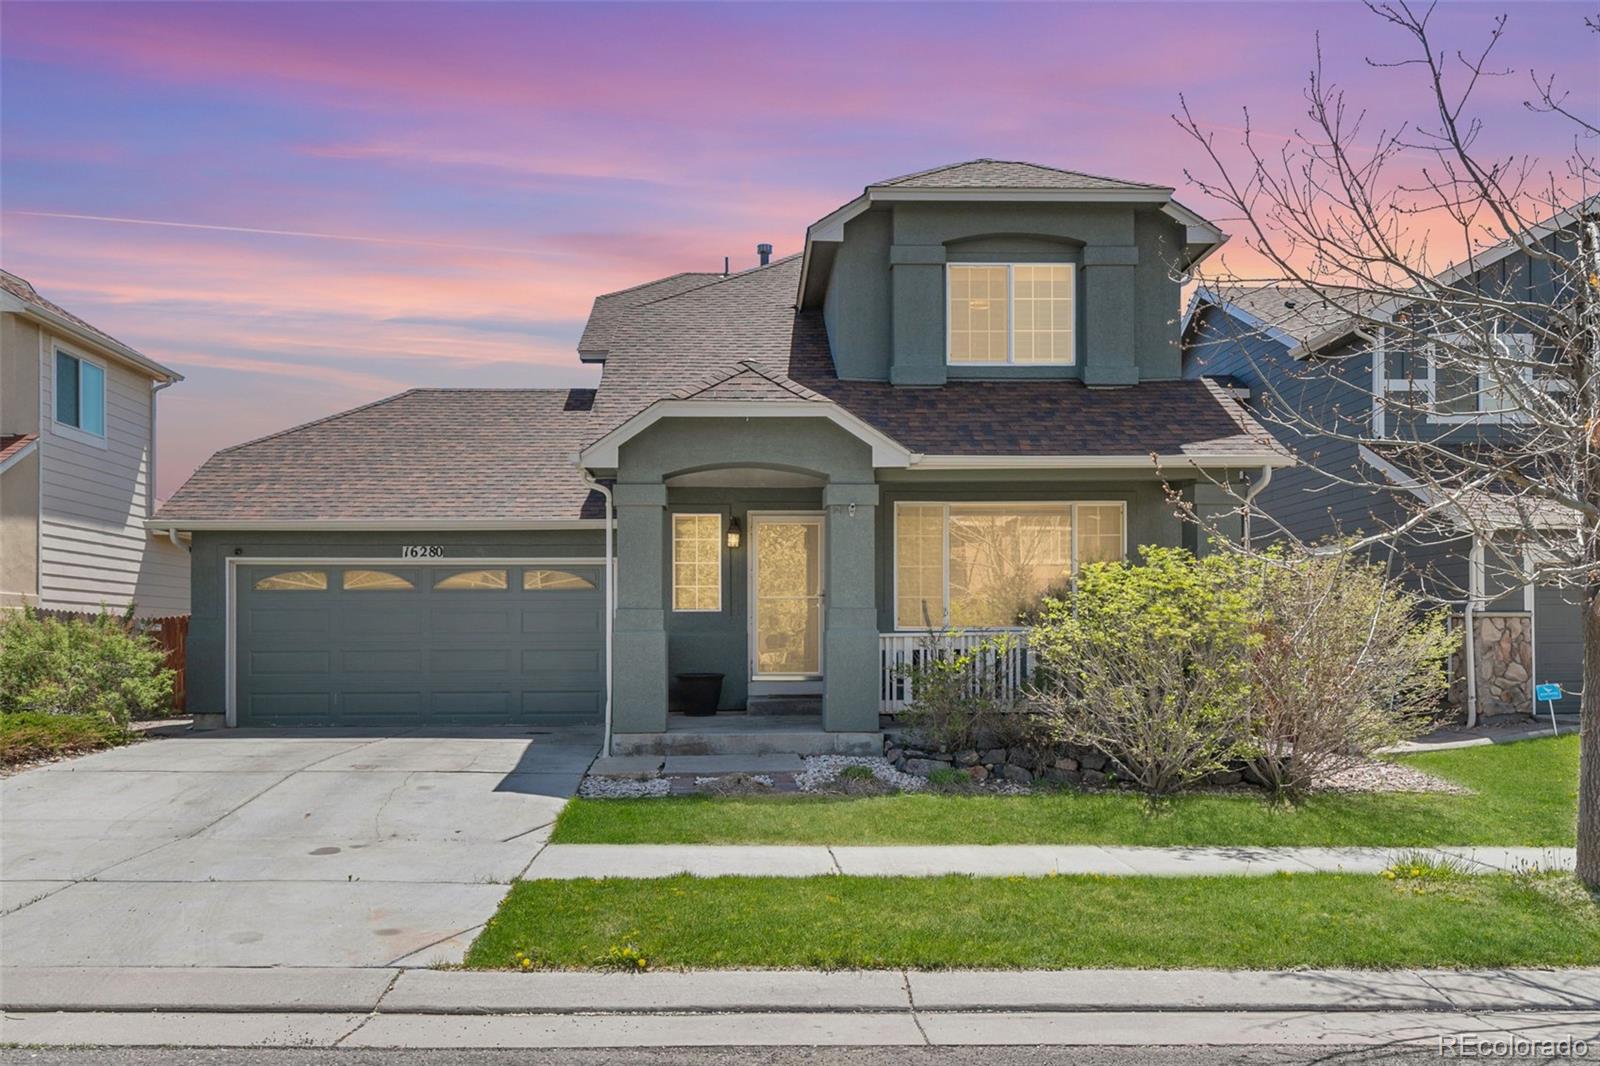 16280 E 106th Way, commerce city MLS: 2603366 Beds: 5 Baths: 4 Price: $485,000